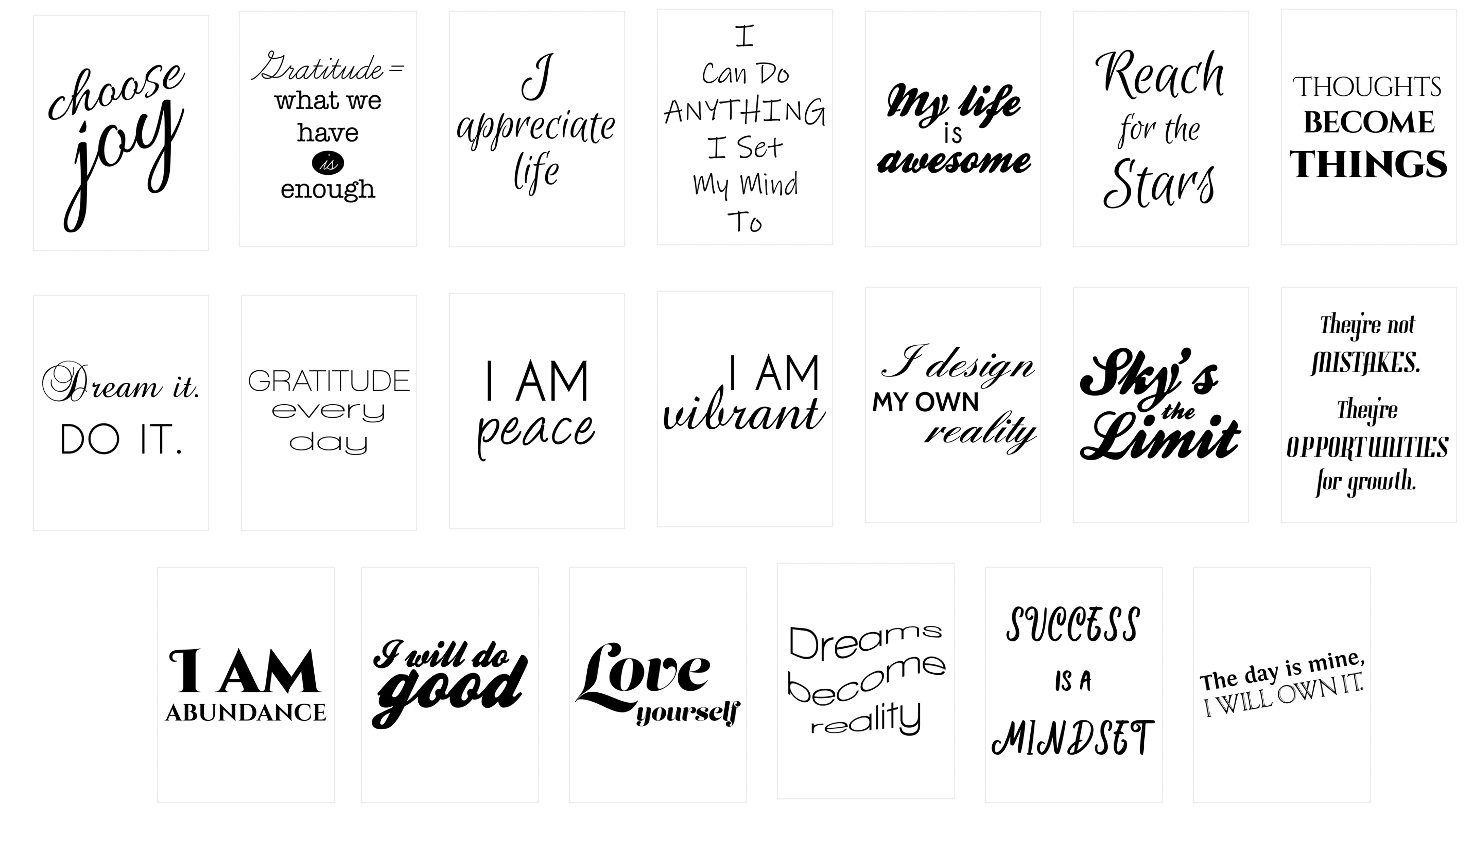 Positive Affirmations Posters